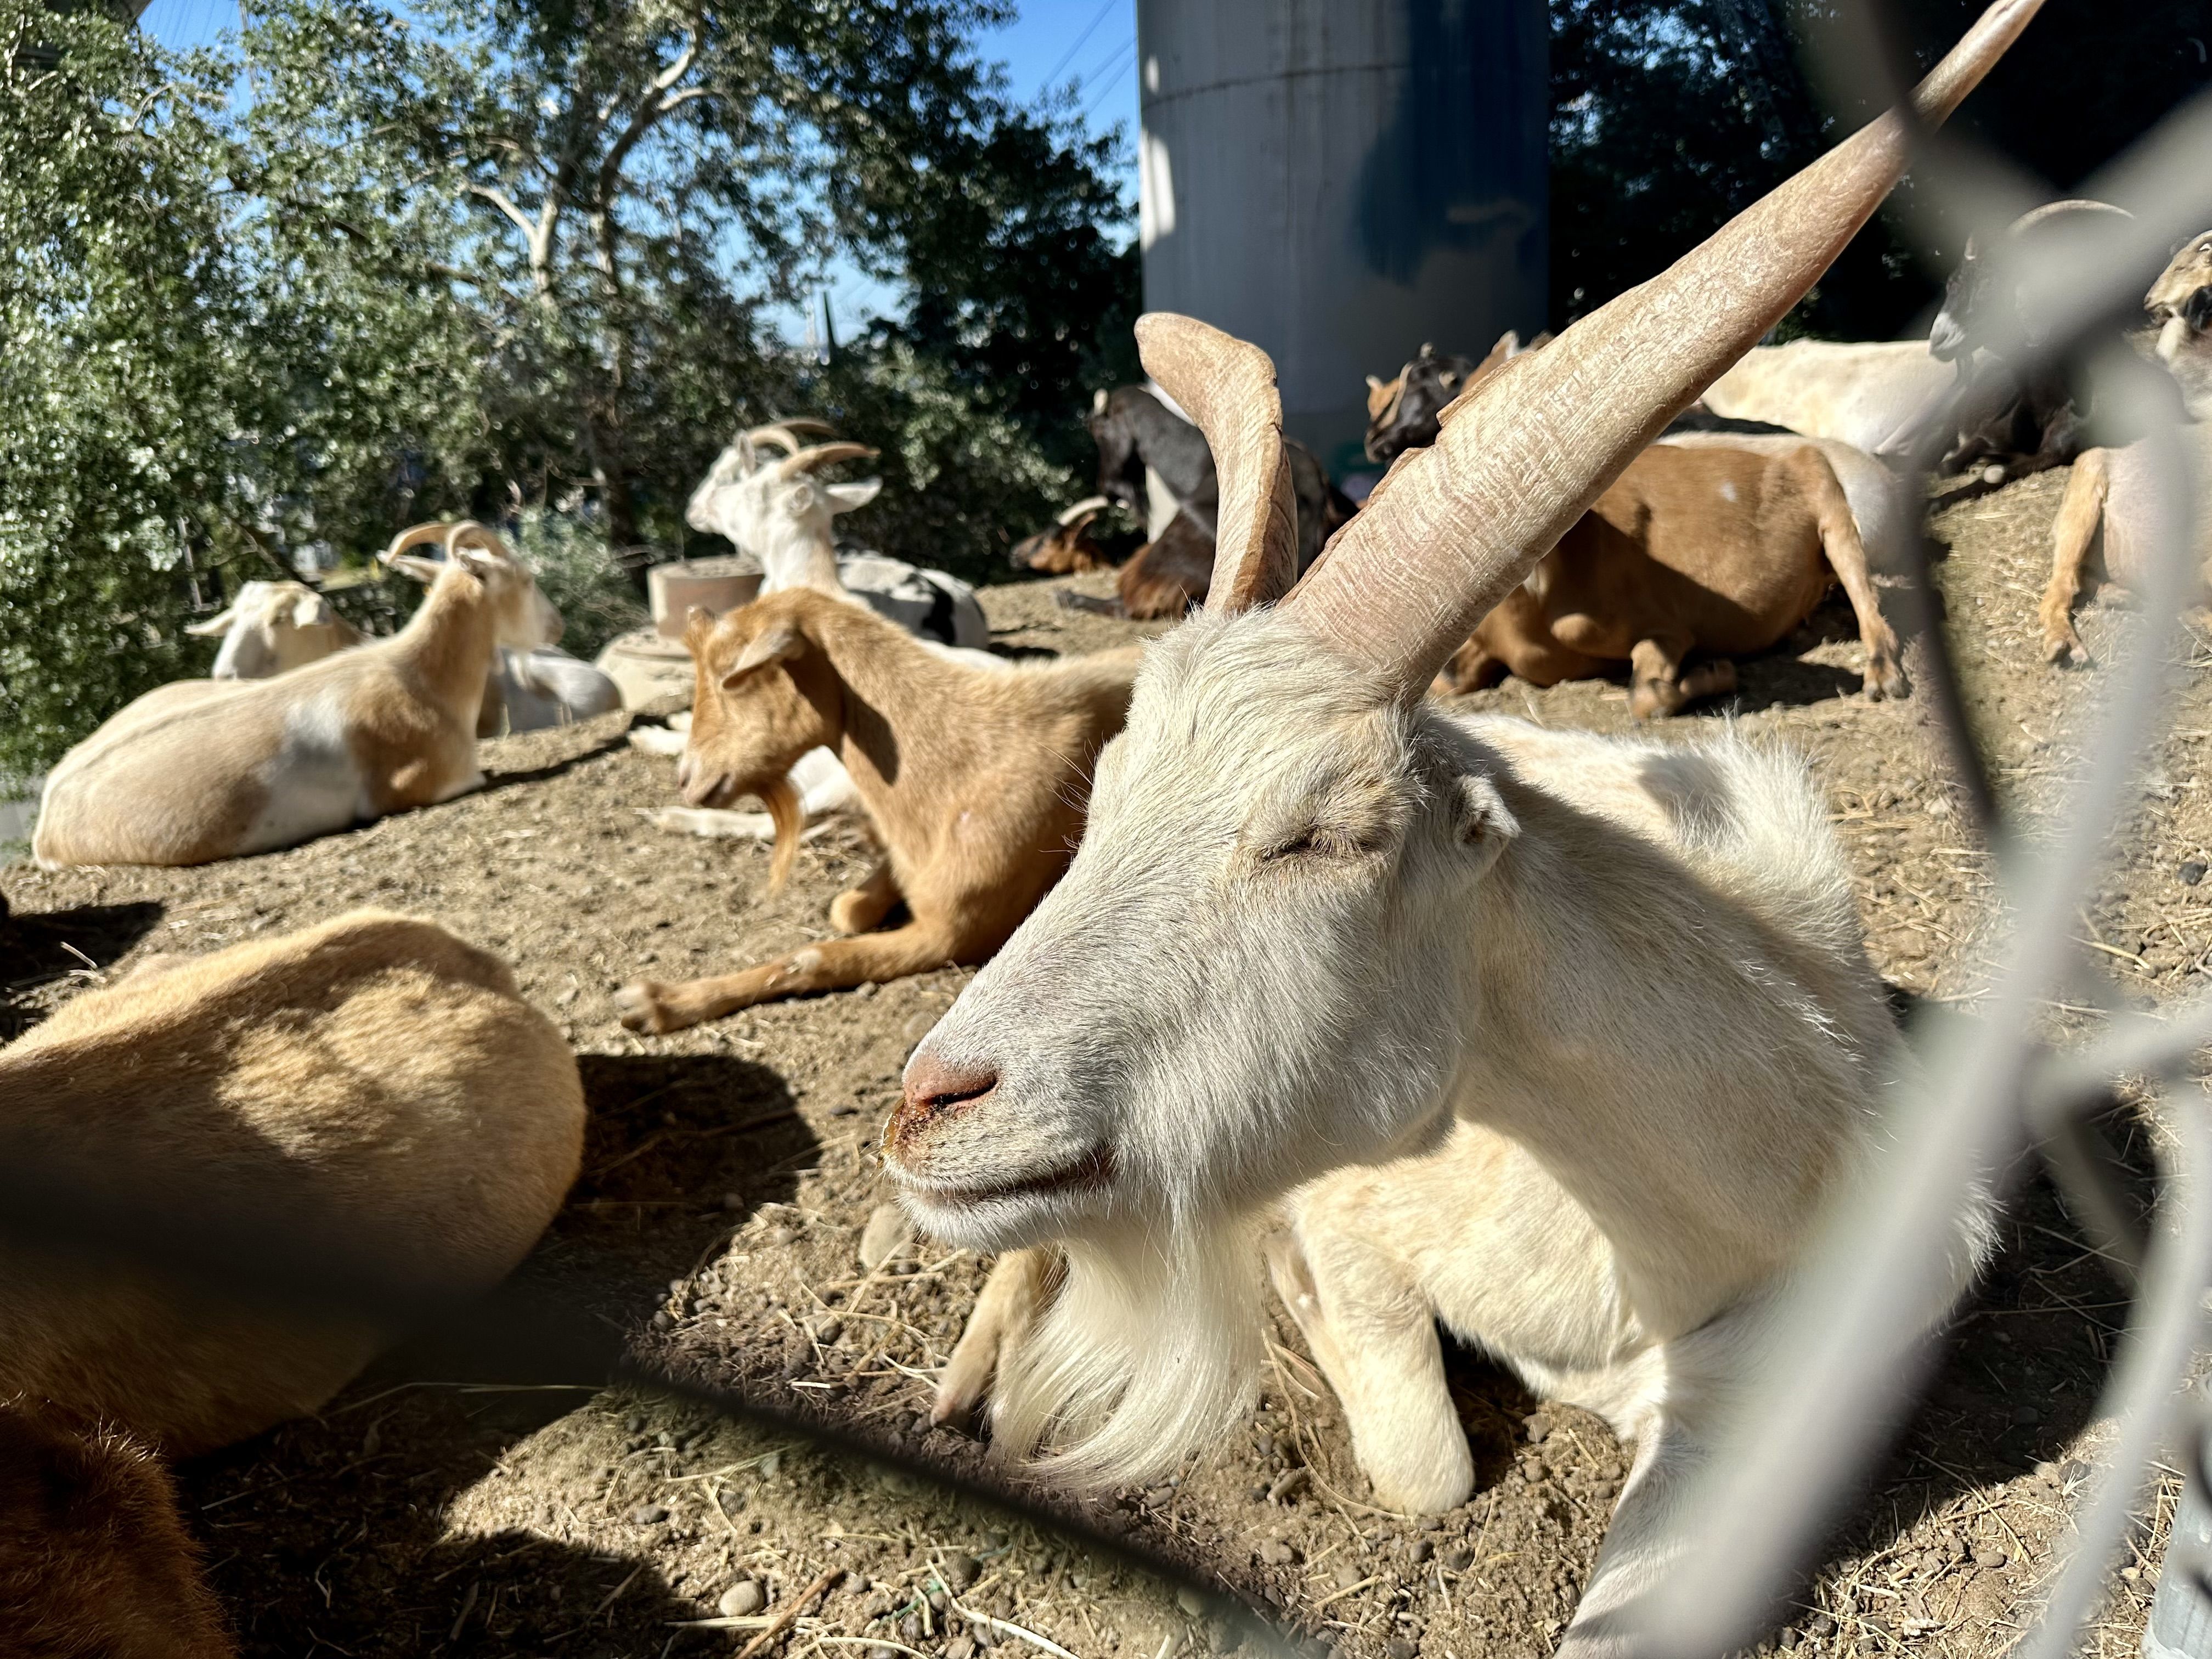 A white goat with large horns closes its eyes while laying on the ground amid other goats, with a chain link fence in foreground.